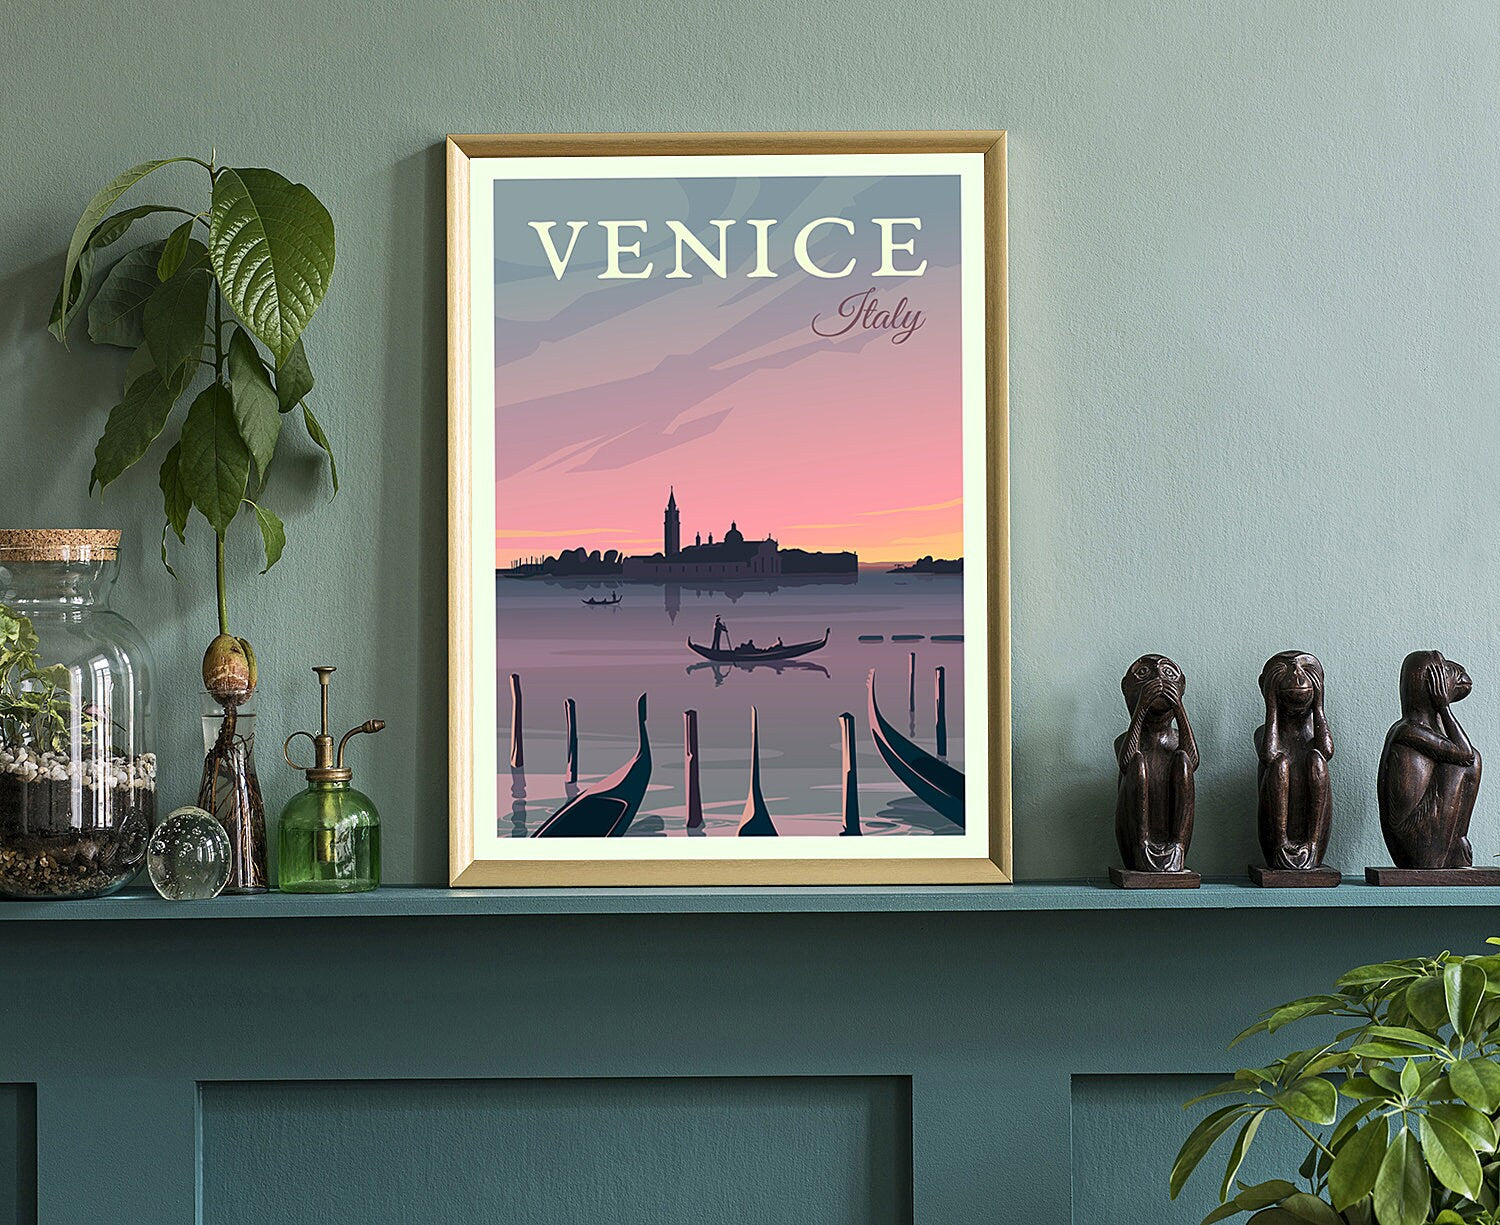 Italy Venice Vintage Rustic Poster Print, Retro Style Travel Poster